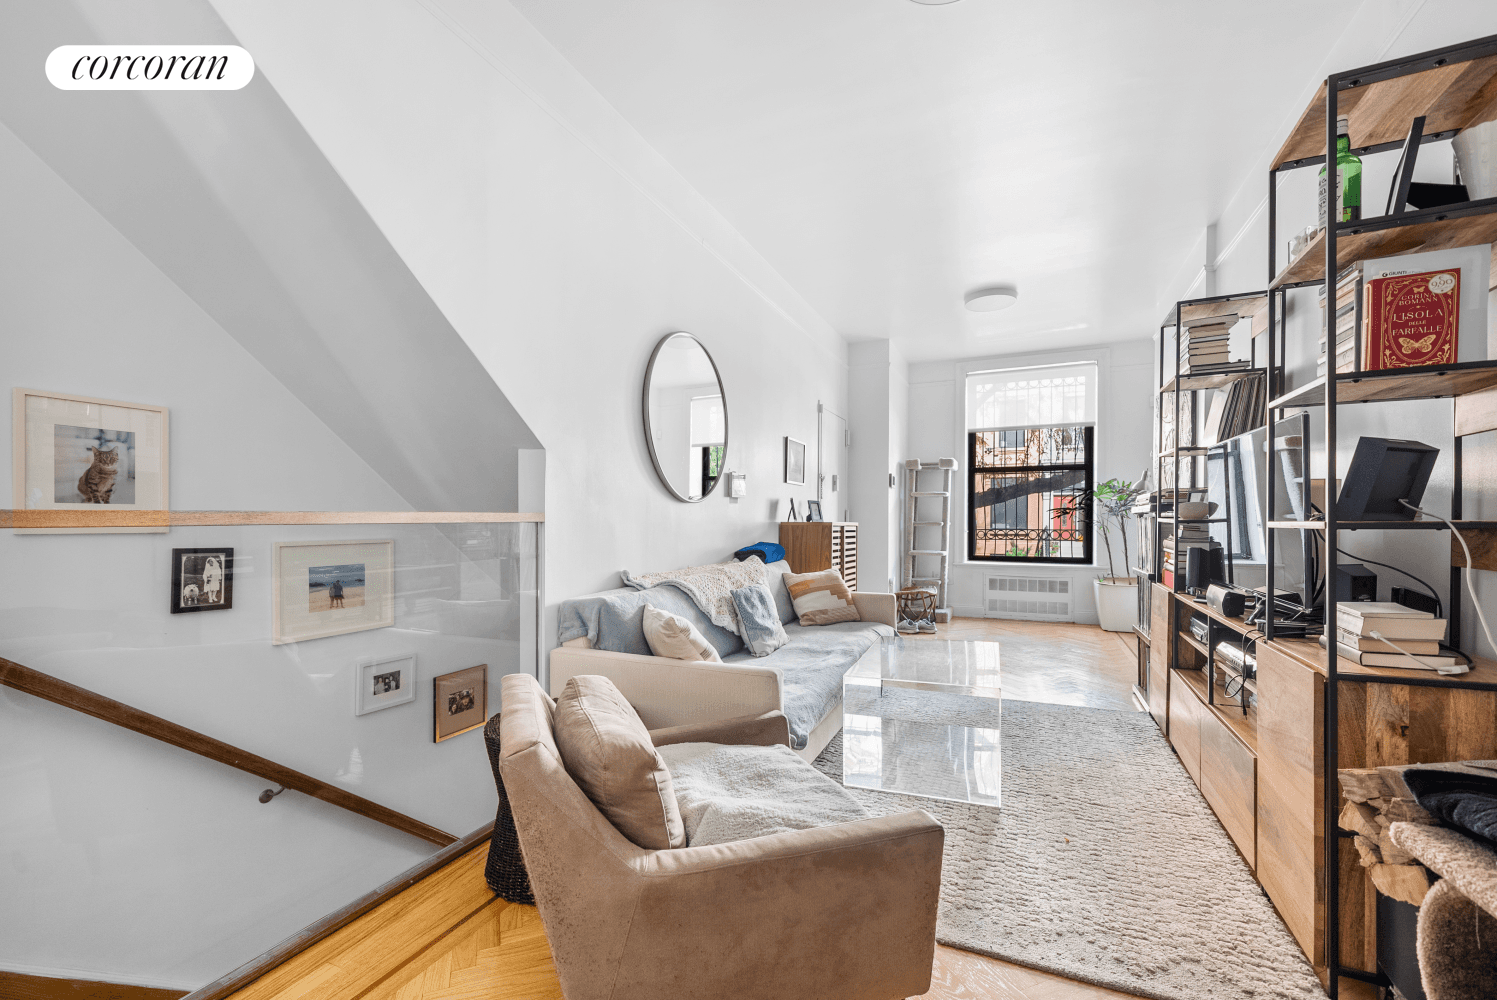 Welcome home to 238 West 132nd Street, an exceptional 3 family brownstone showcasing a 1500 square foot owner's duplex, an impeccably refurbished backyard, and two market rate floor through rental ...